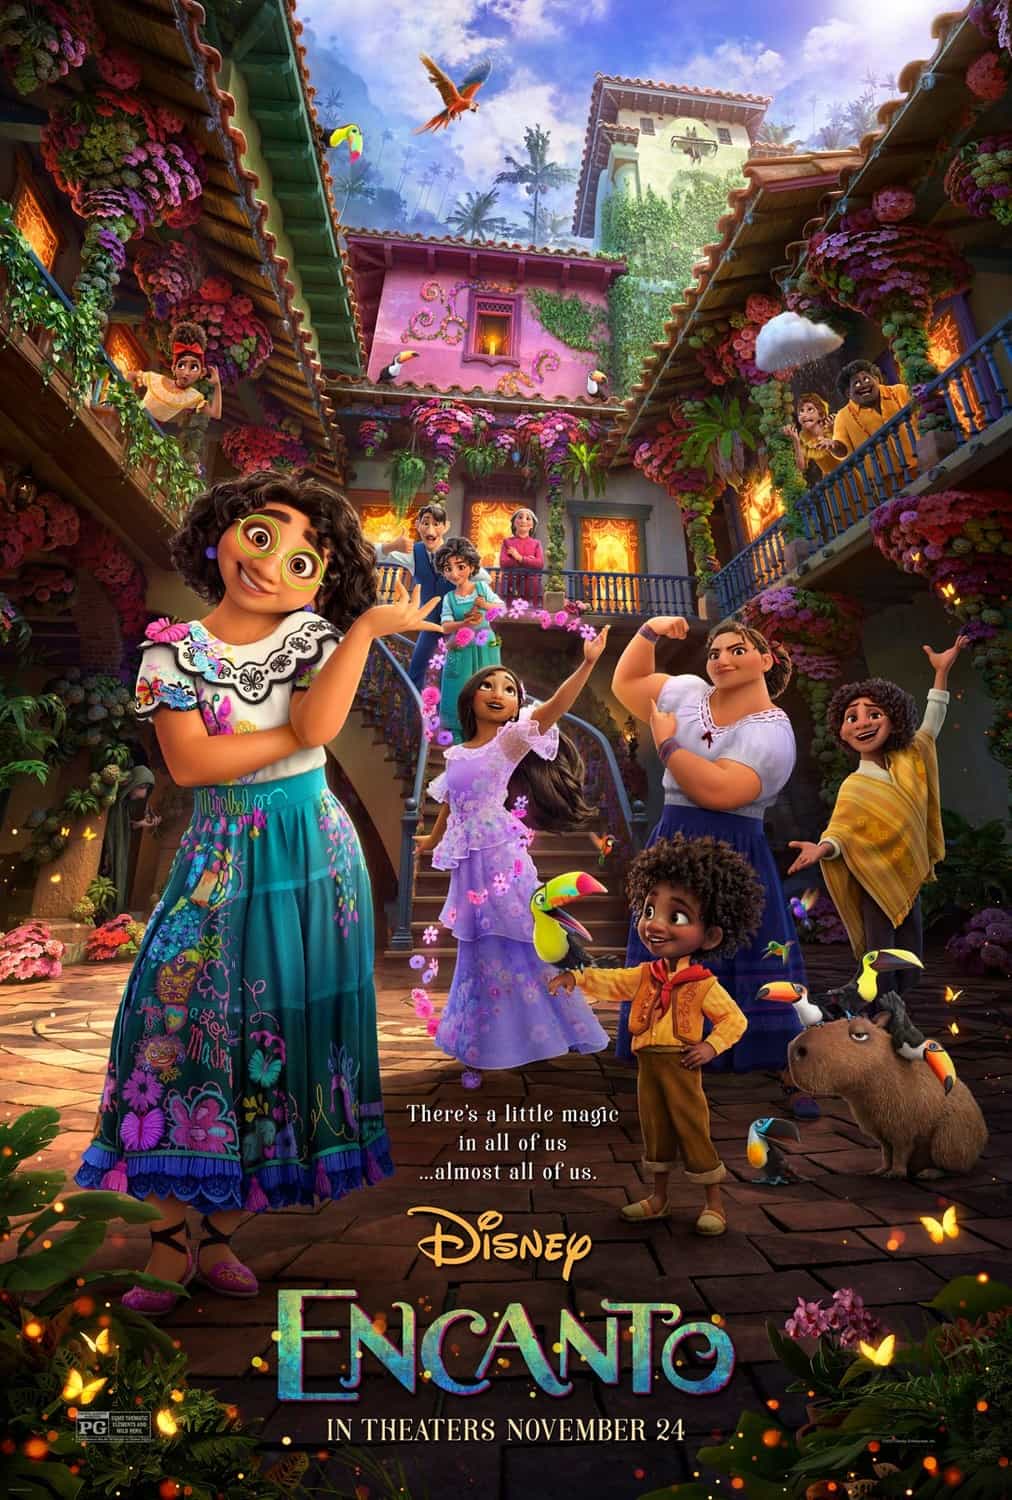 Global Box Office Figures 26th - 28th November 2021:  Disney take Encanto to number 1 on its debut weekend of release while House of Gucci is new at 3